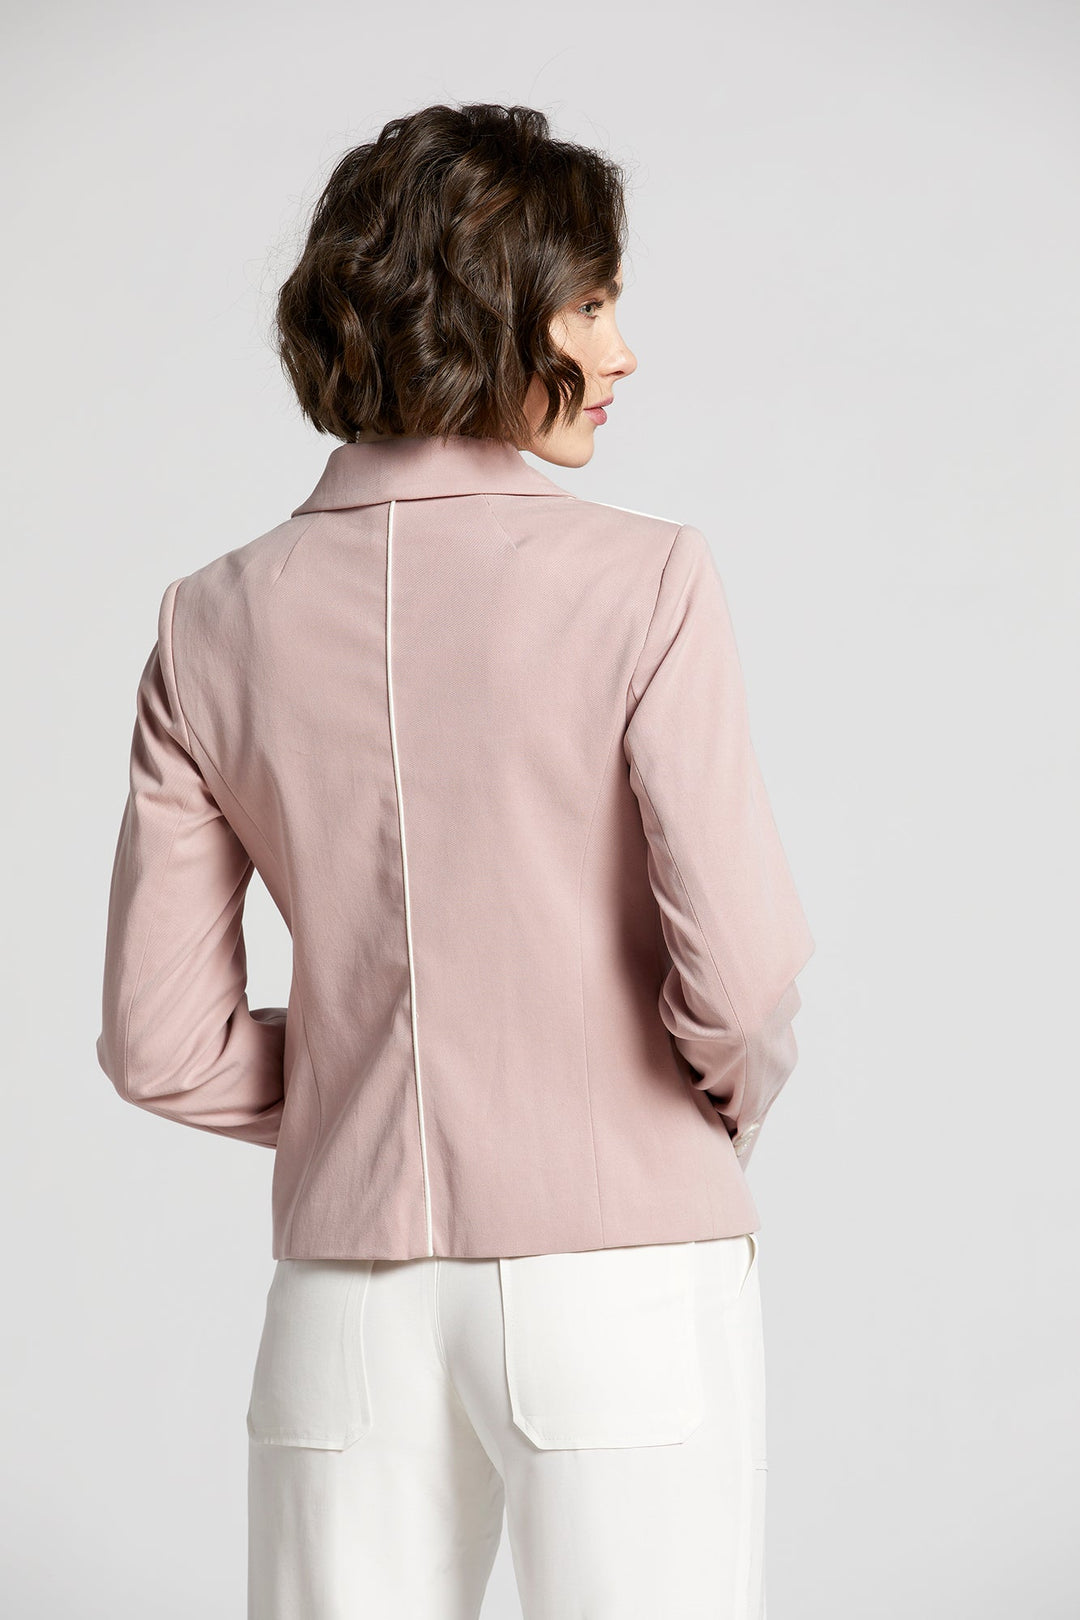 Noa Single Breasted Stretch Blazer With Piping - Blush/White